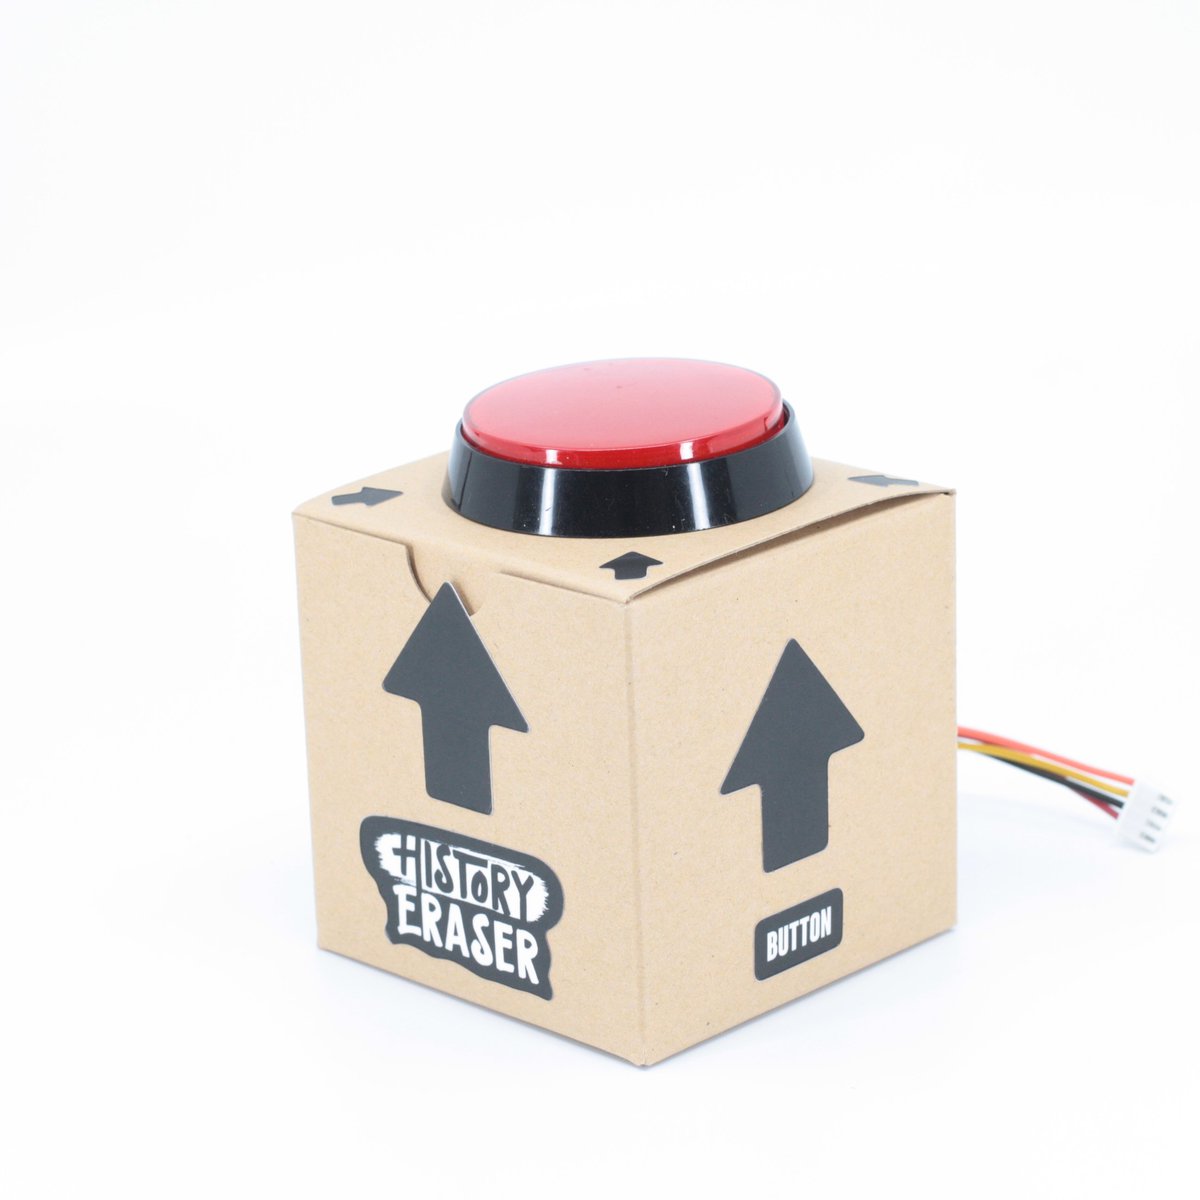 Big Red Button Kit from Alpenglow Industries on Tindie